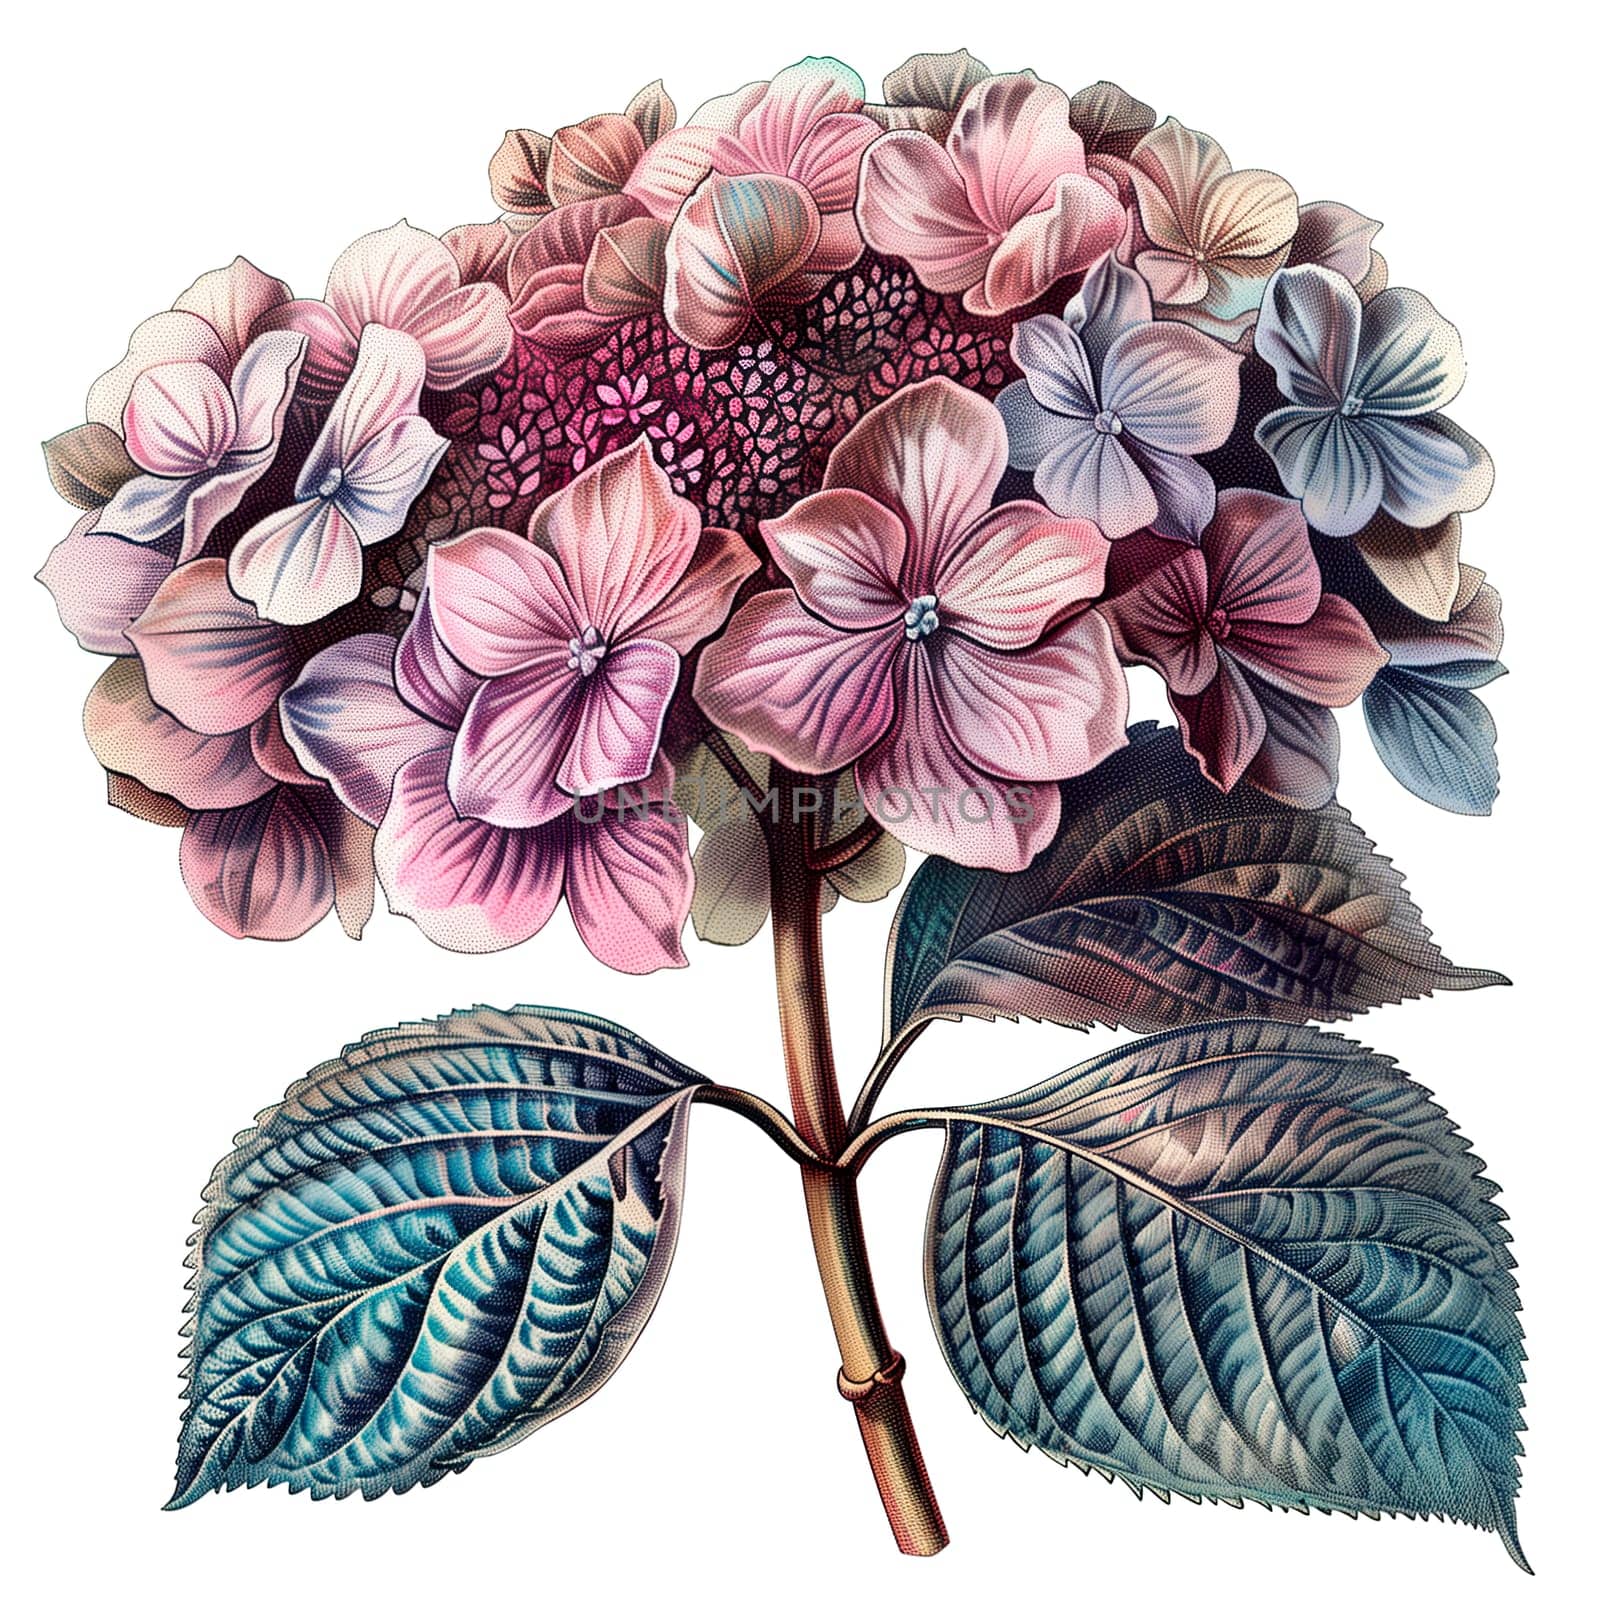 Isolated illustration of hydrangea with purple petal by Dustick